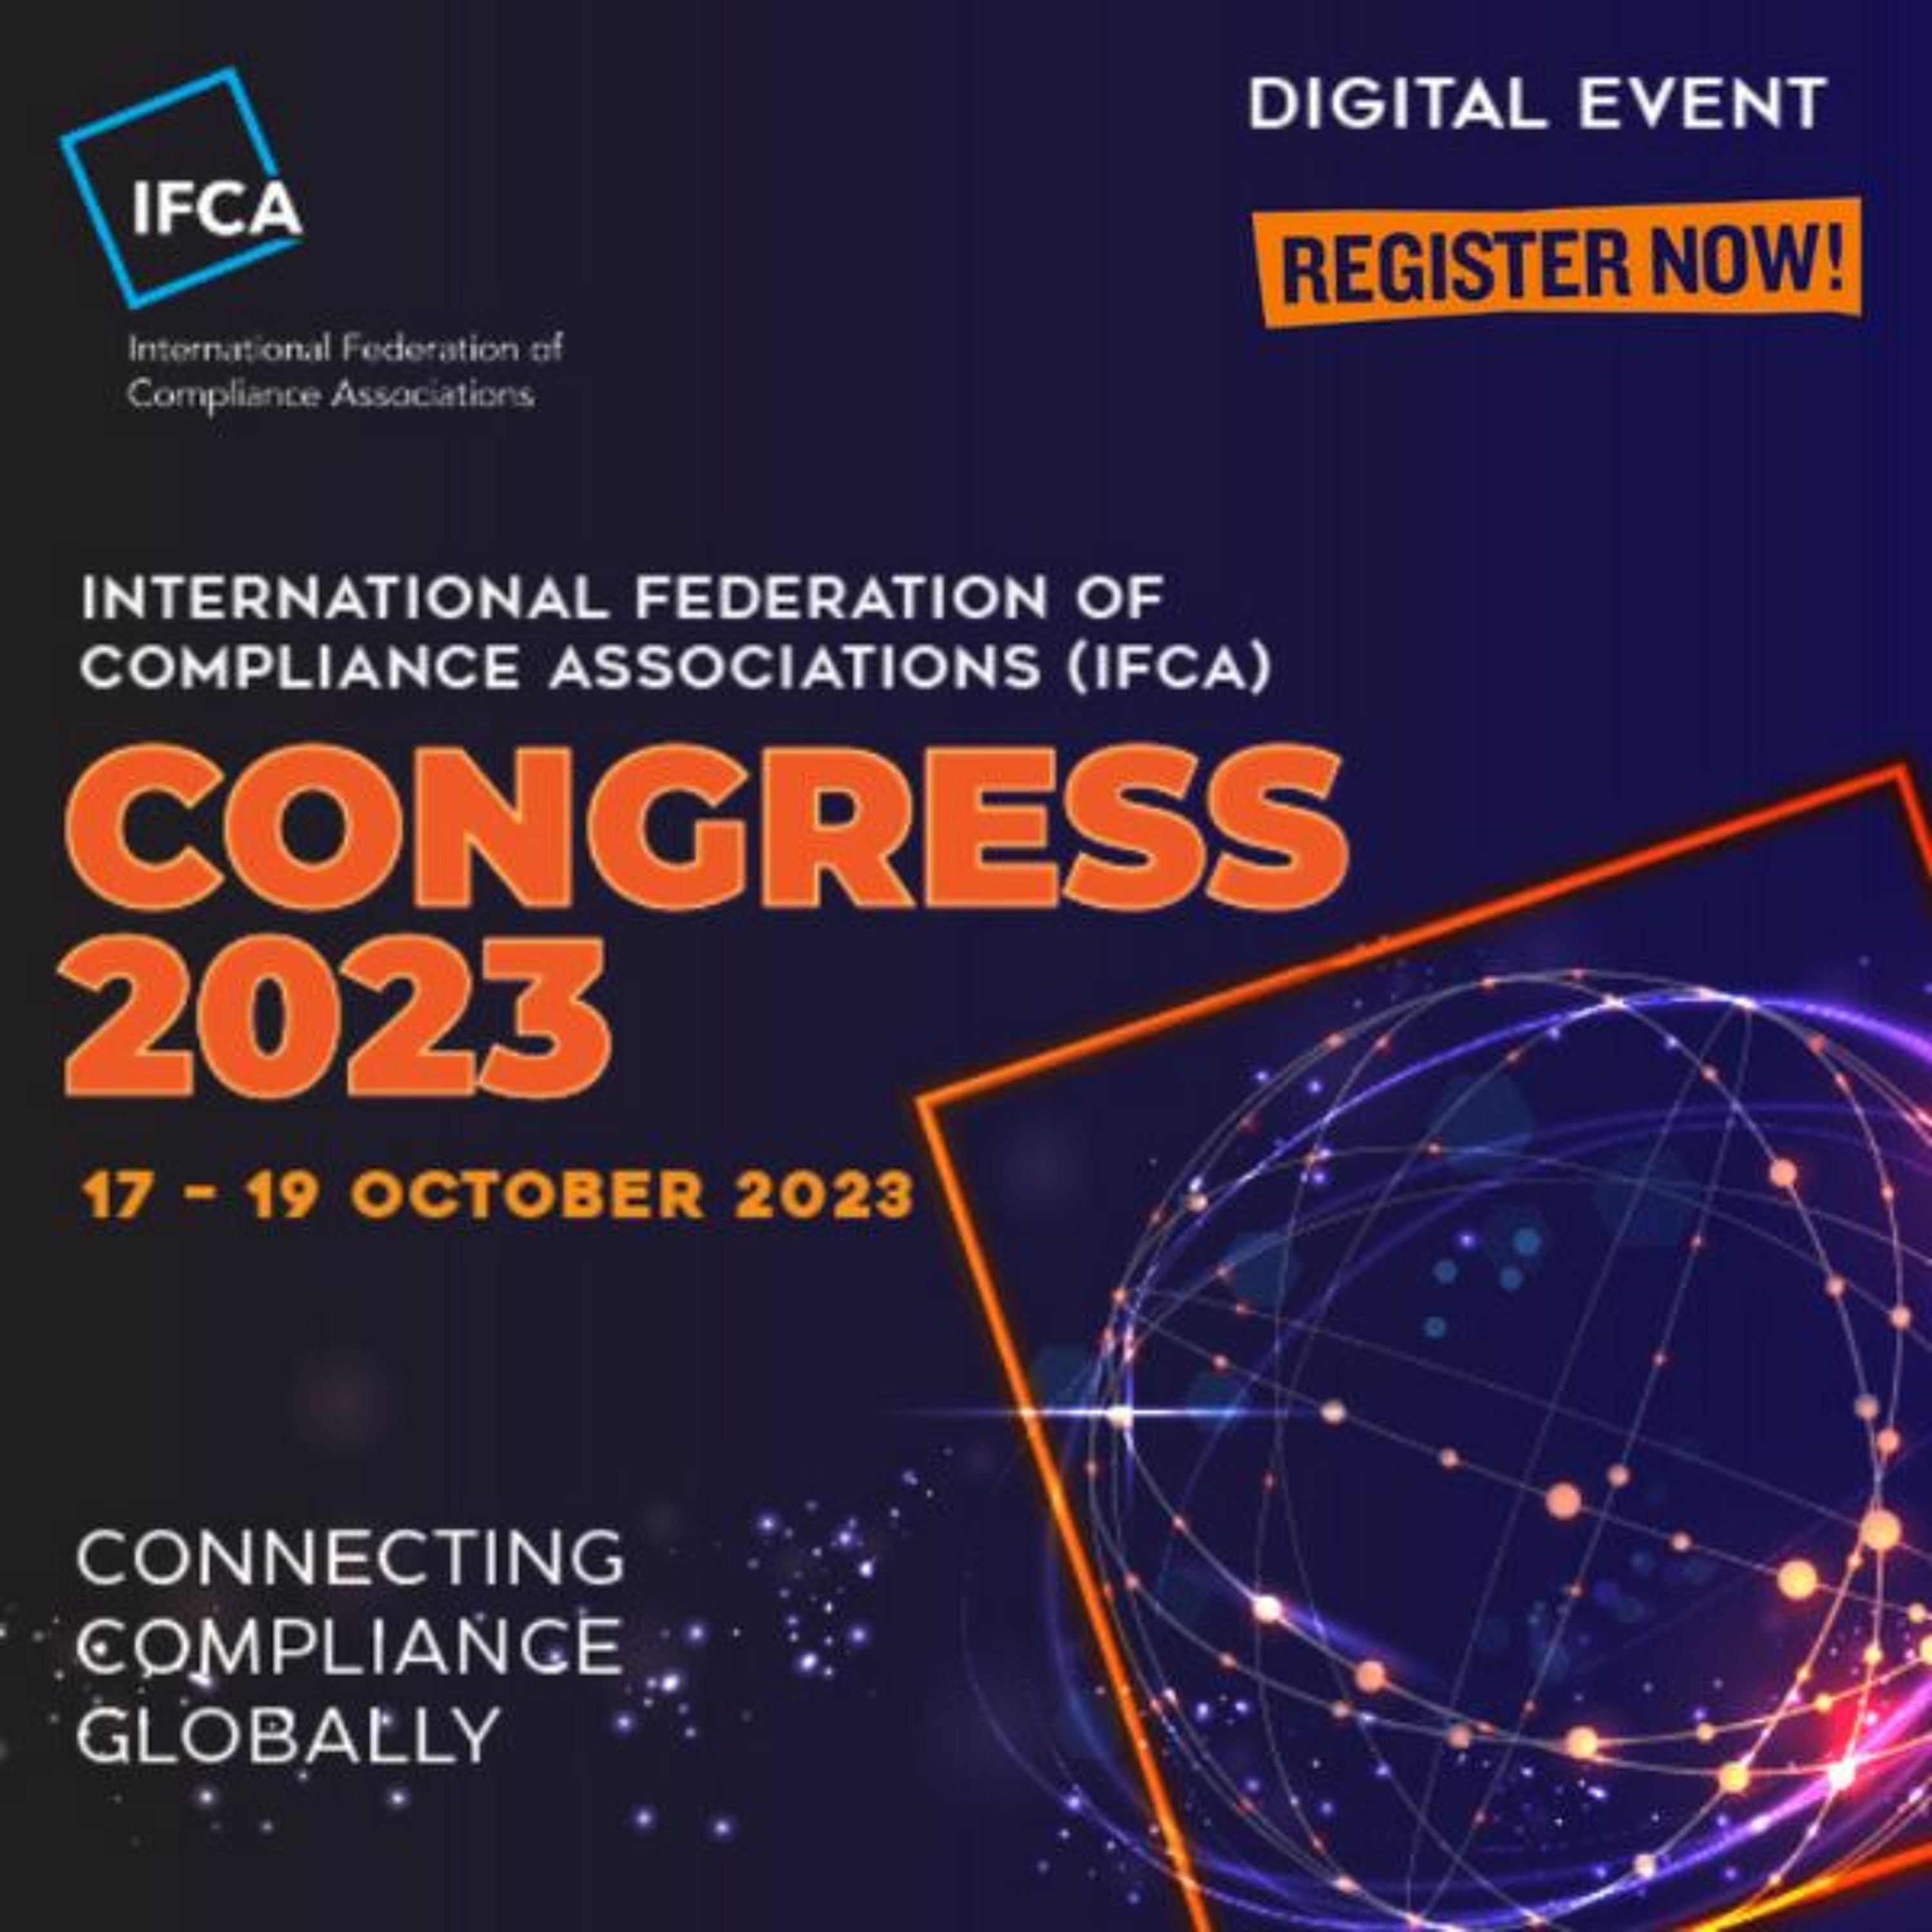 What To Expect From The IFCA Conference